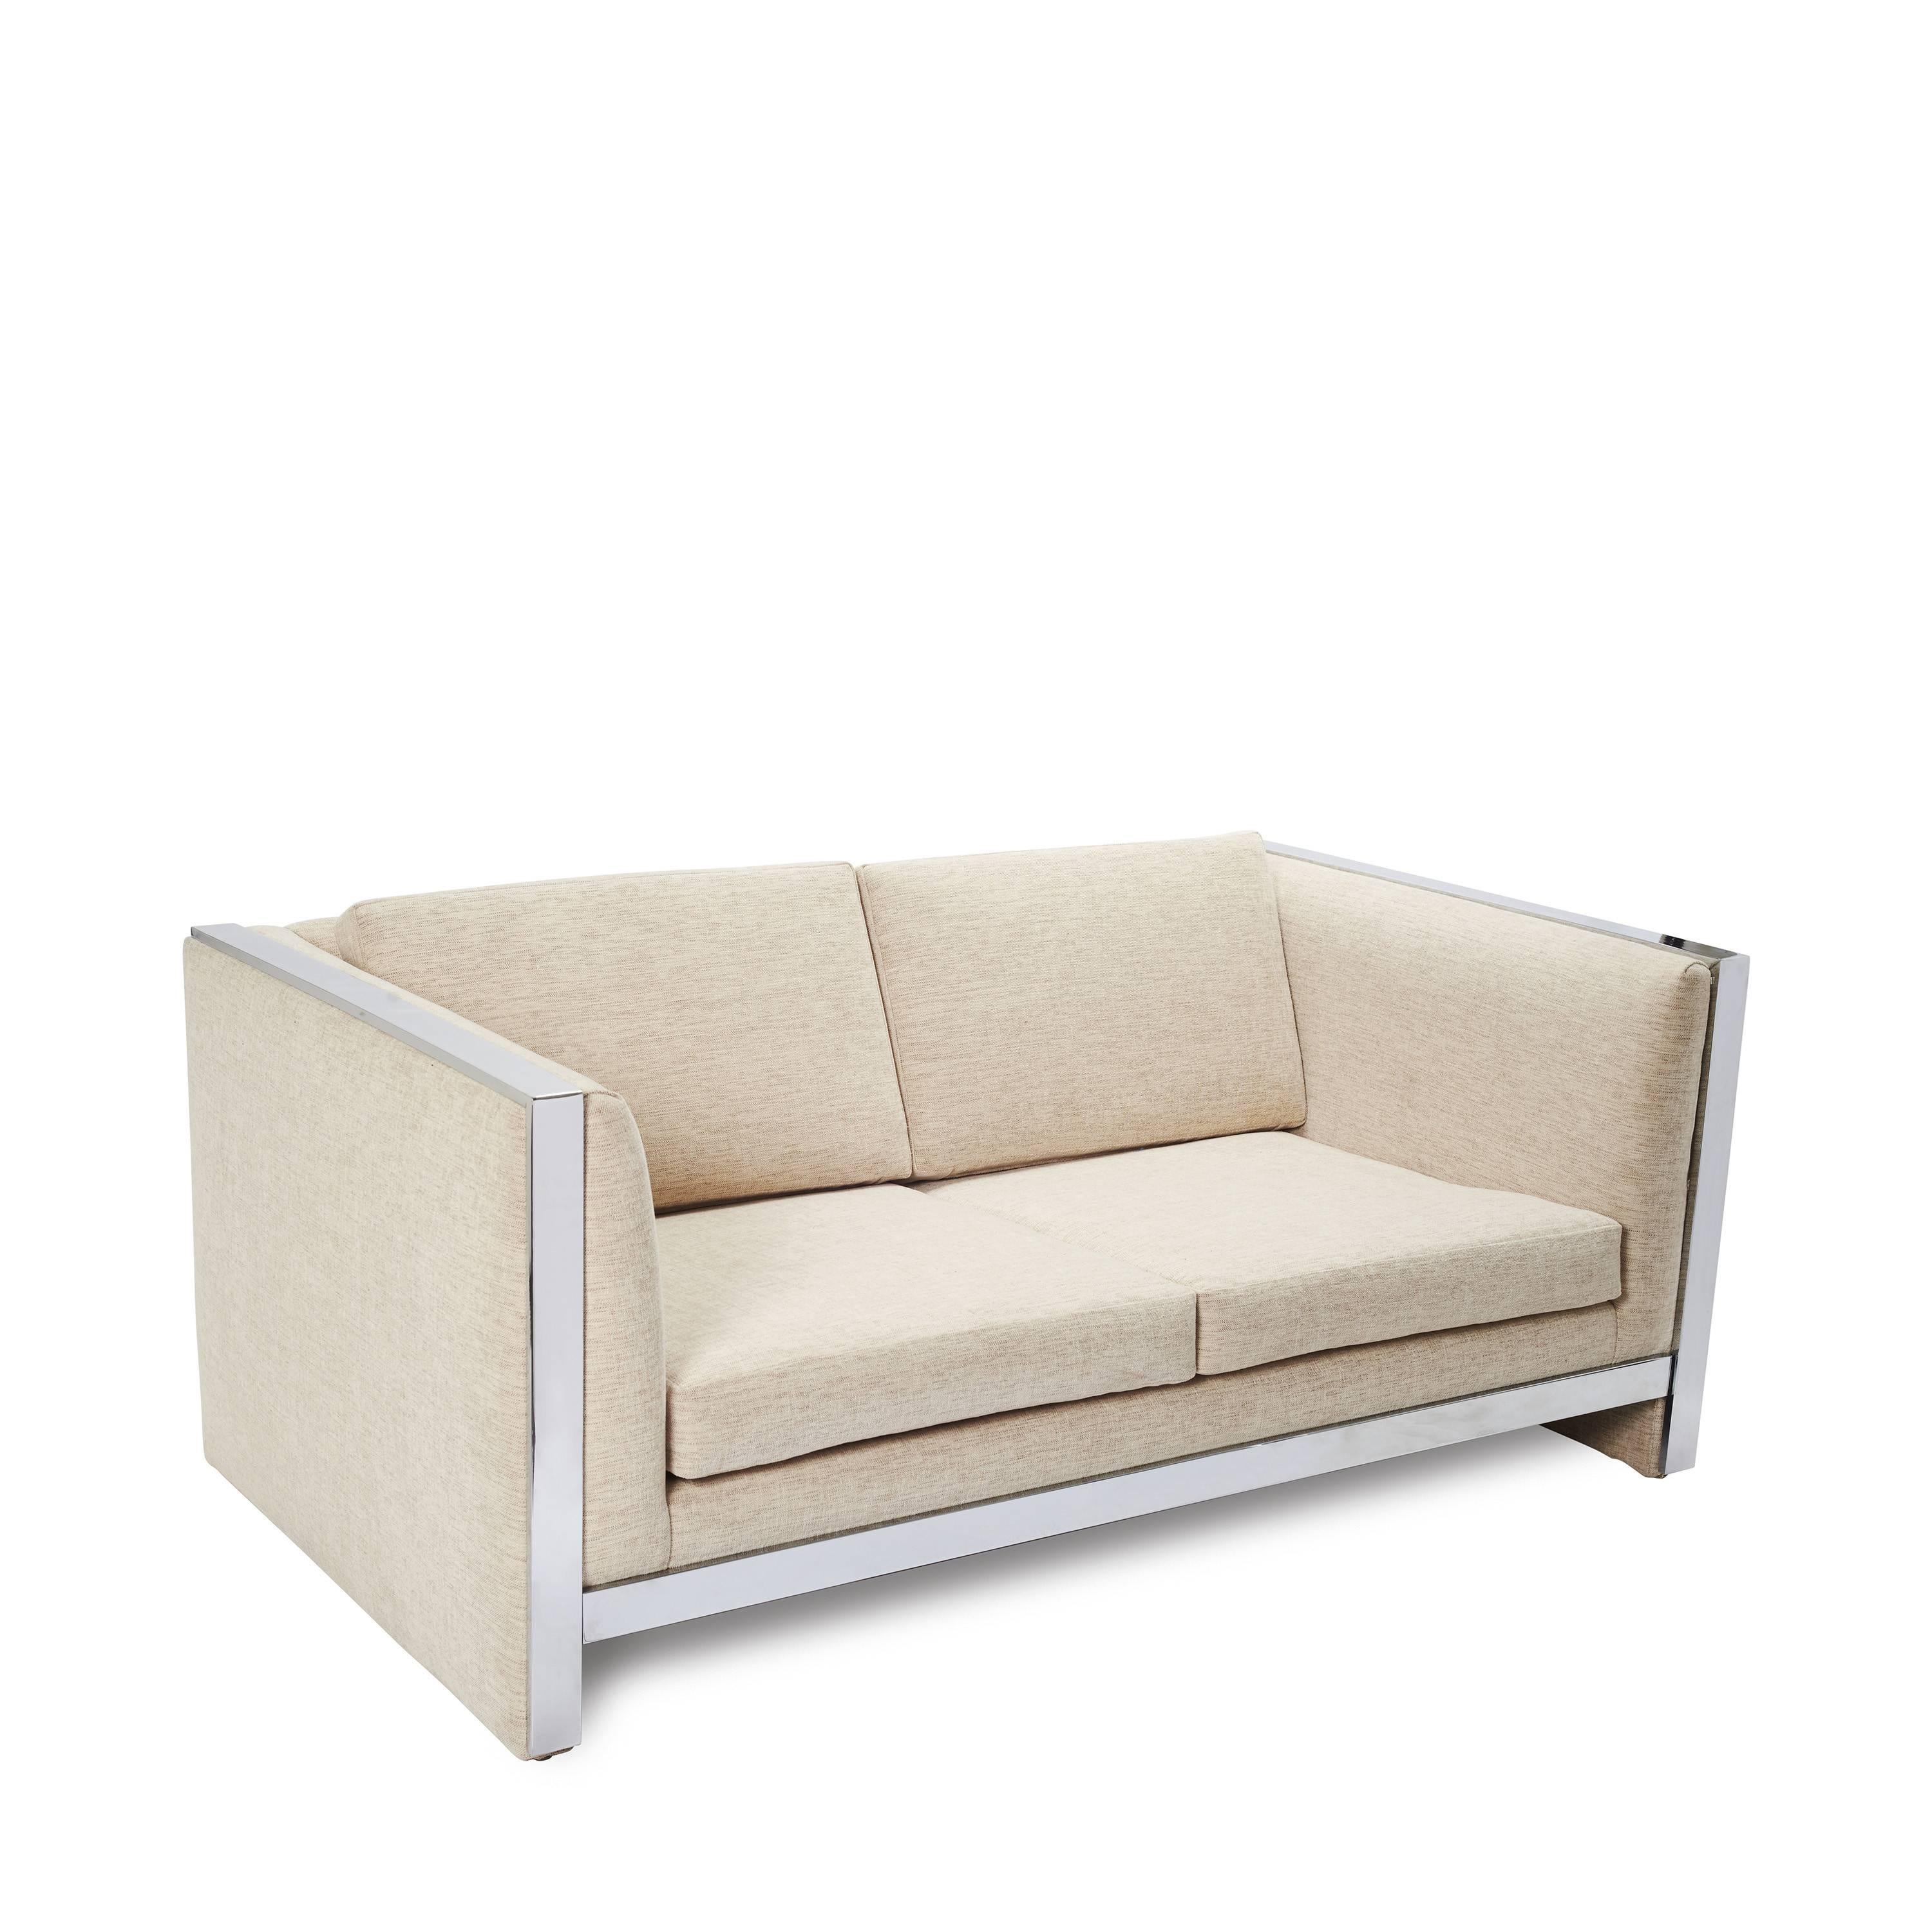 Mid-Century Modern sofa in the style of Milo Baughman. Newly upholstered fabric.